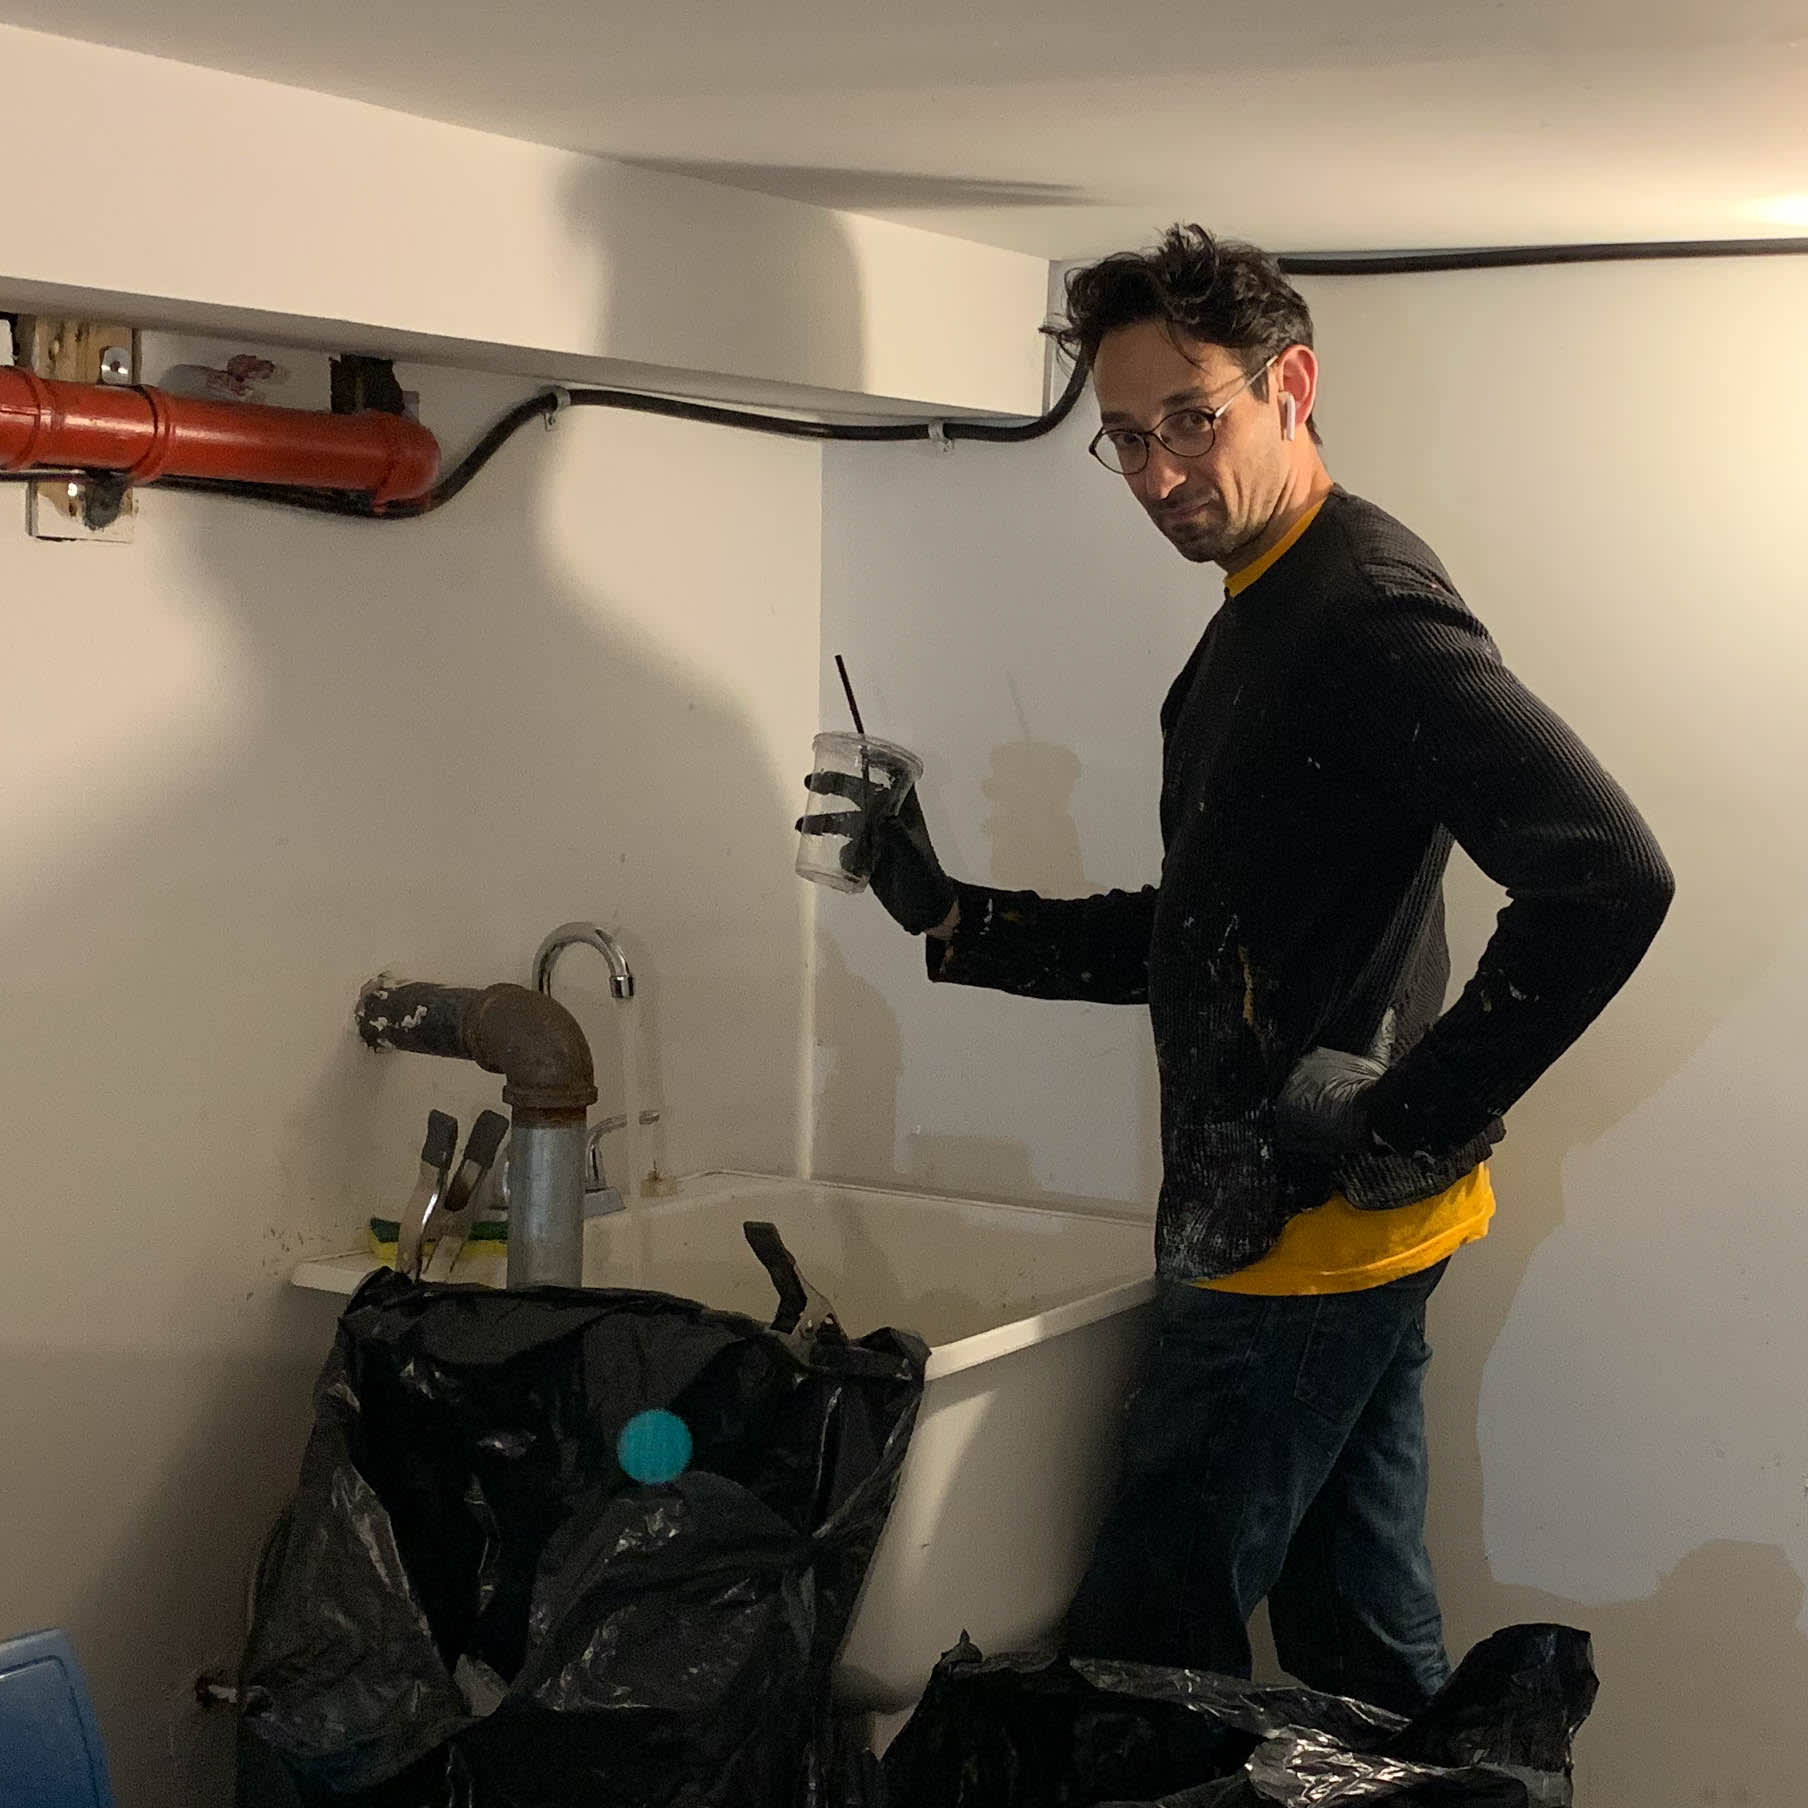 Photograph of a man (the artist), looking at the camera and dressed in tattered, 'art studio' wear, standing by a laundry sink (in a basement) holding a plastic cup as though he is about to wash it.